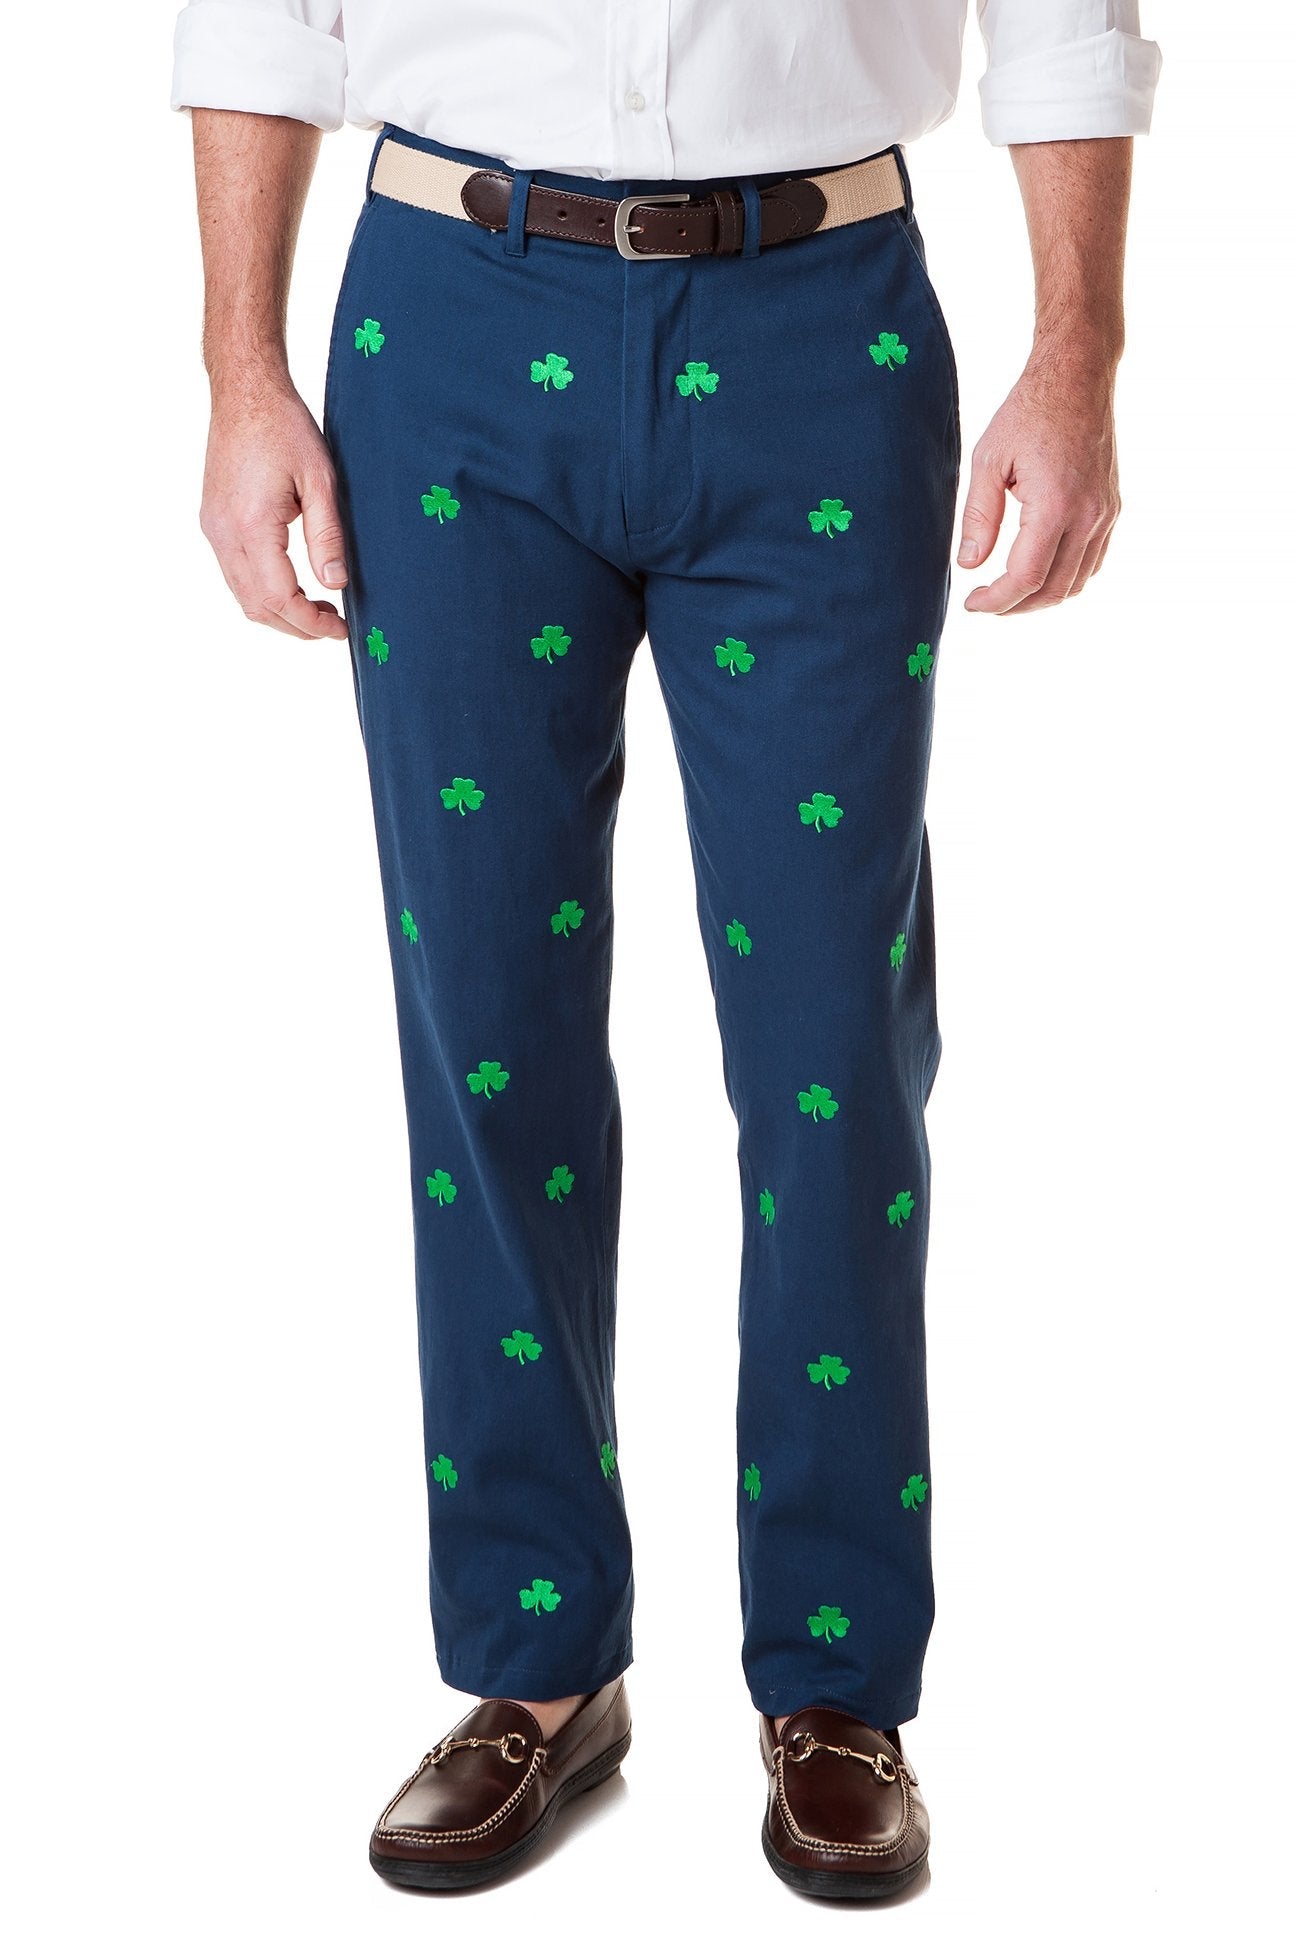 Mens Embroidered Pant Navy With Shamrocks for St. Patricks Day – Castaway  Nantucket Island